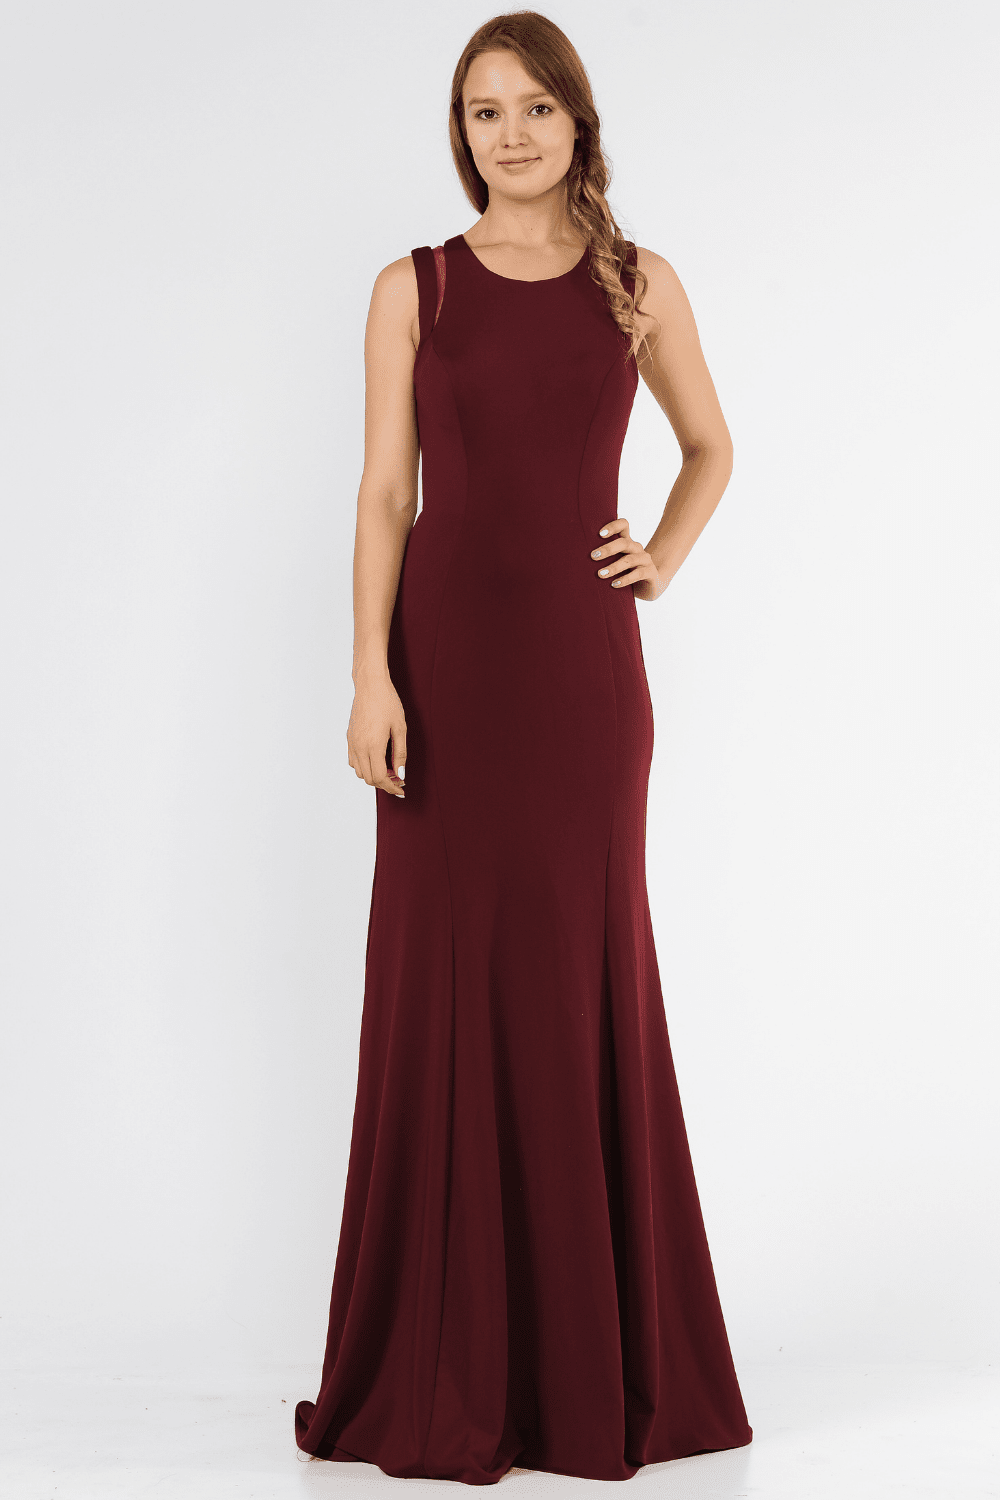 Long Formal Dress with Back Cut Outs by Poly USA 8232